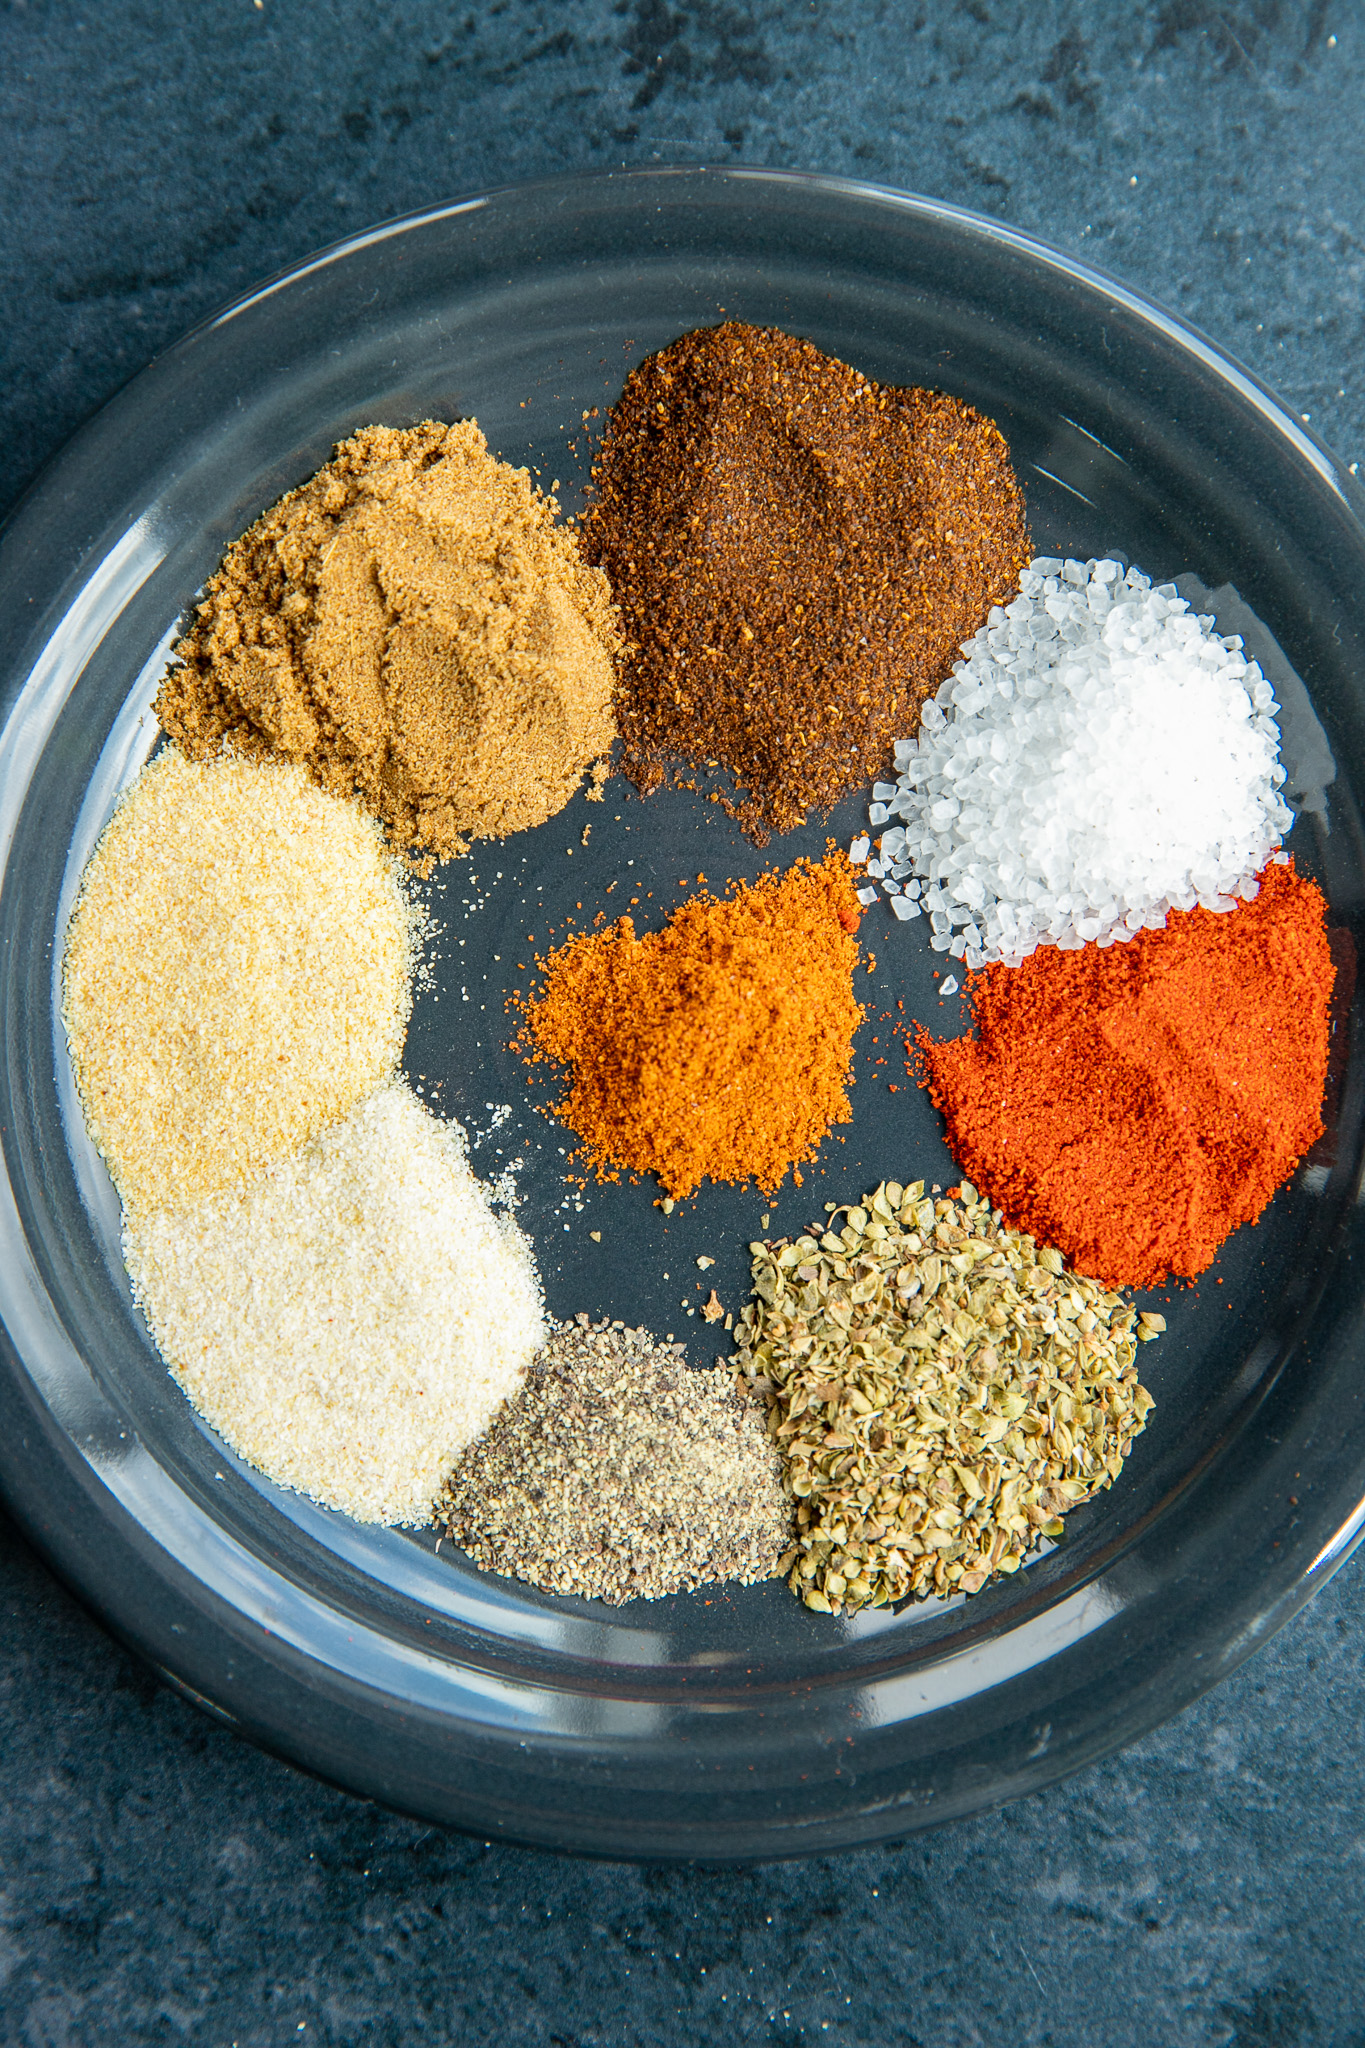 Image of spices for homemade seasoning